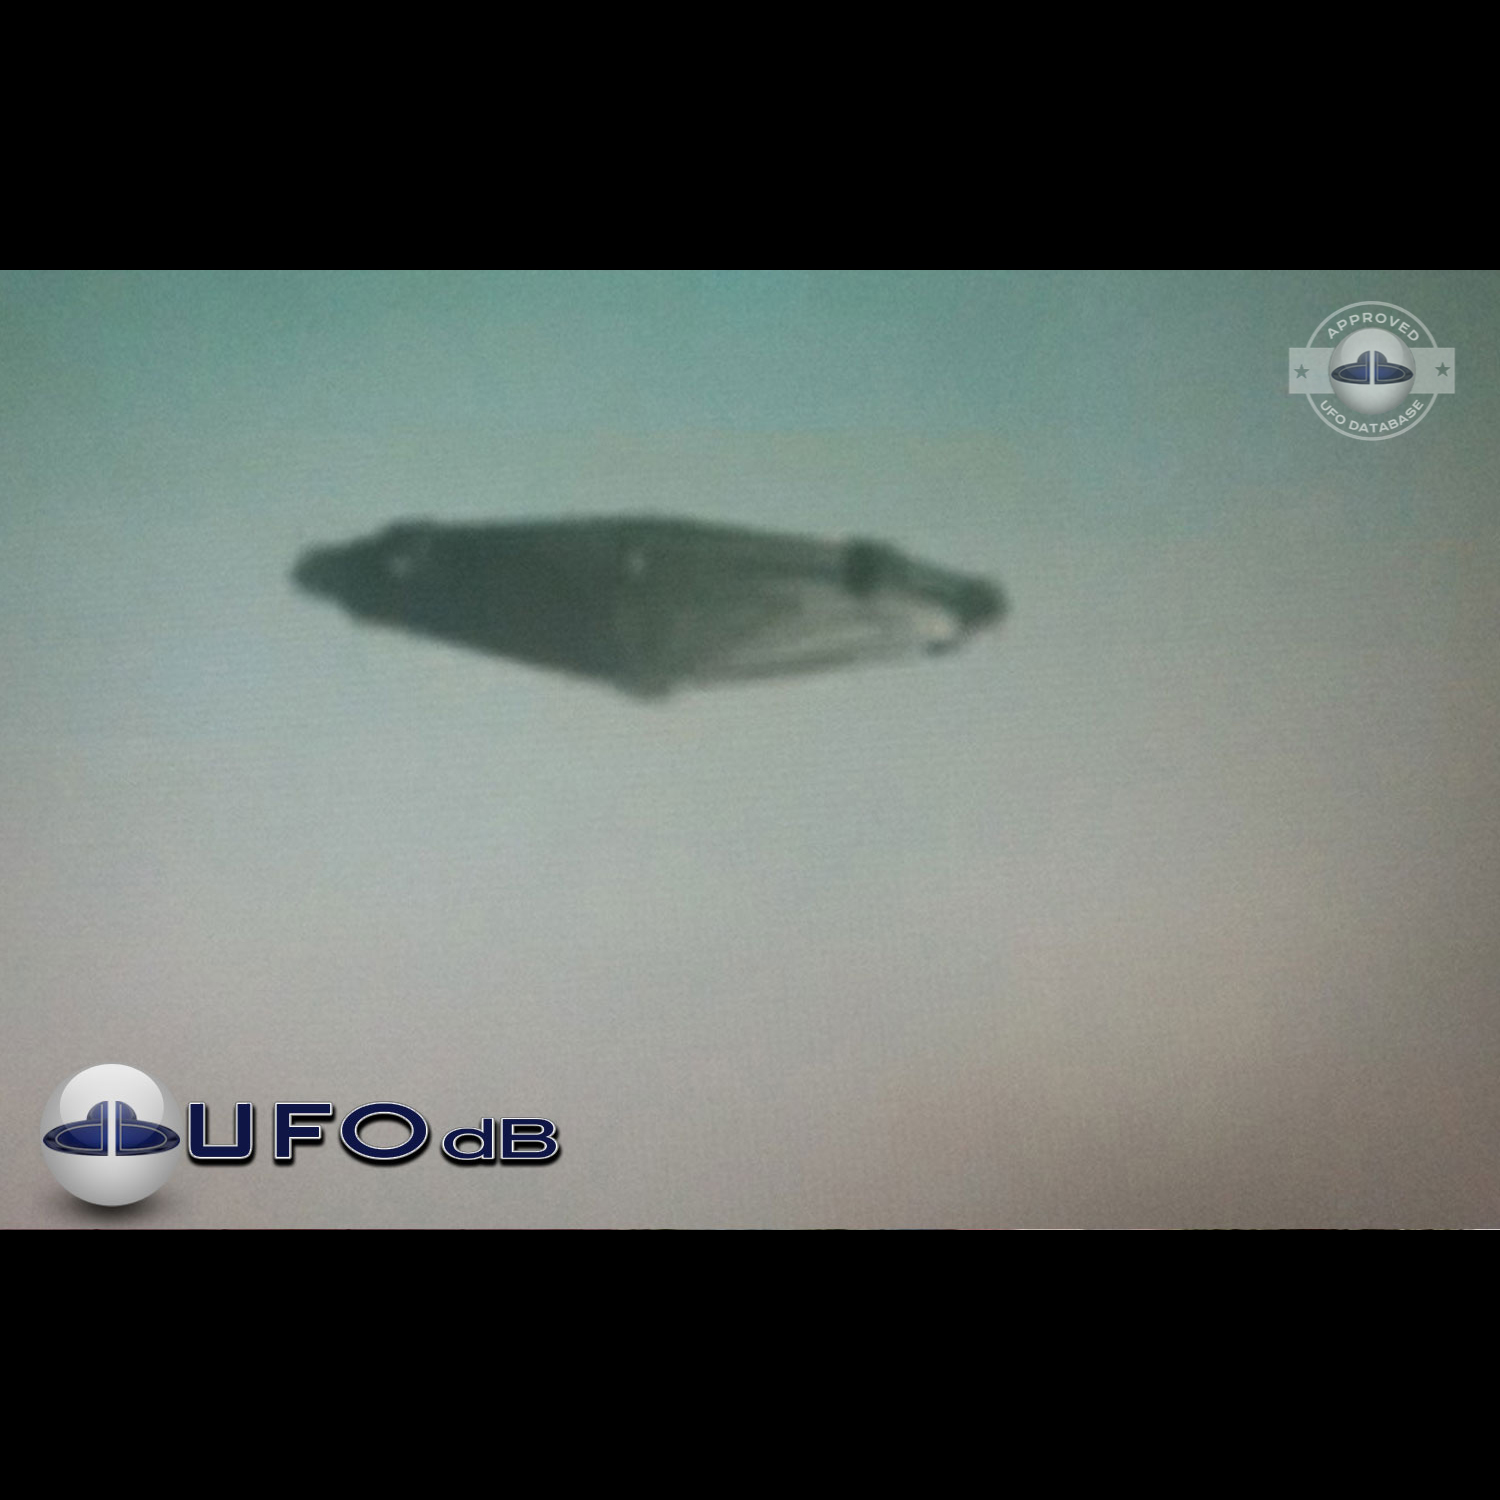 Students saw in amazement the UFO with a metallic flying saucer shape UFO Picture #90-1